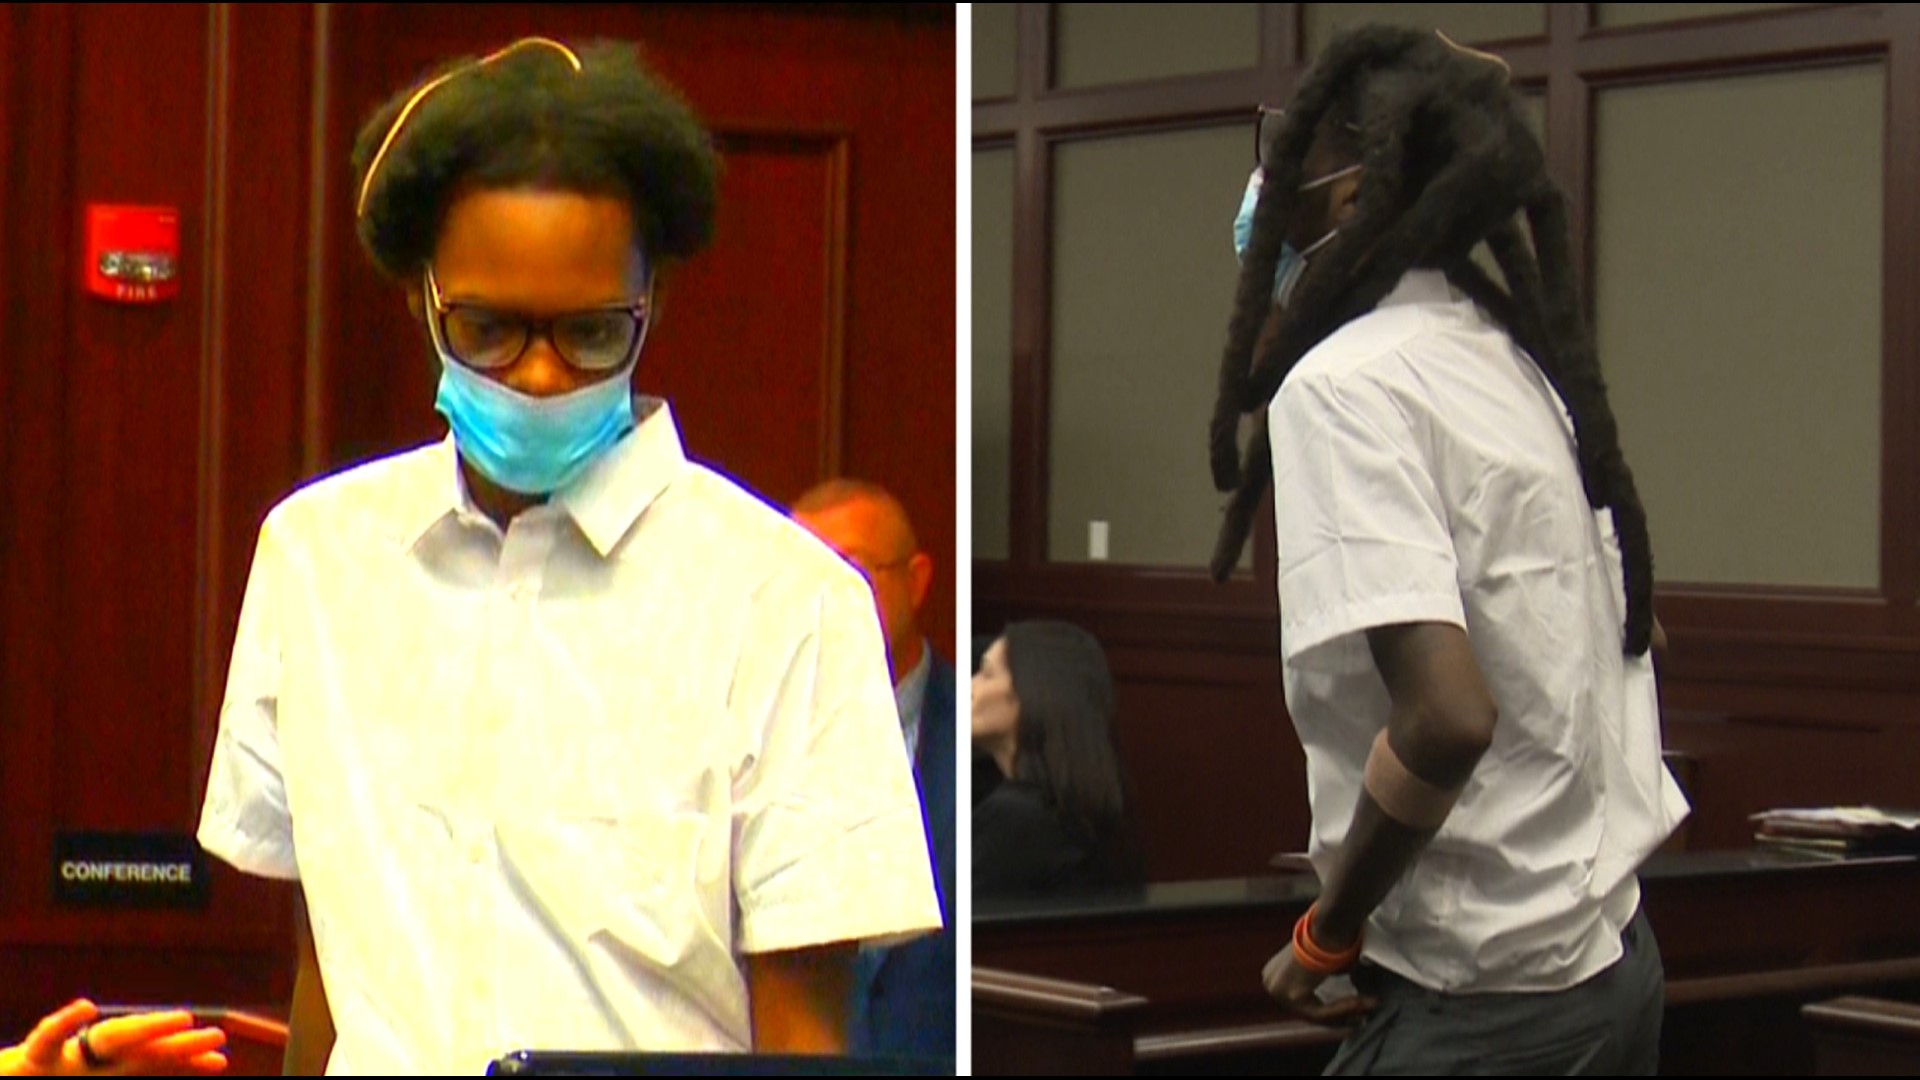 Jacksonville rapper Foolio made a rare court appearance Thursday at what was scheduled to be the final hearing before his trial begins Monday.